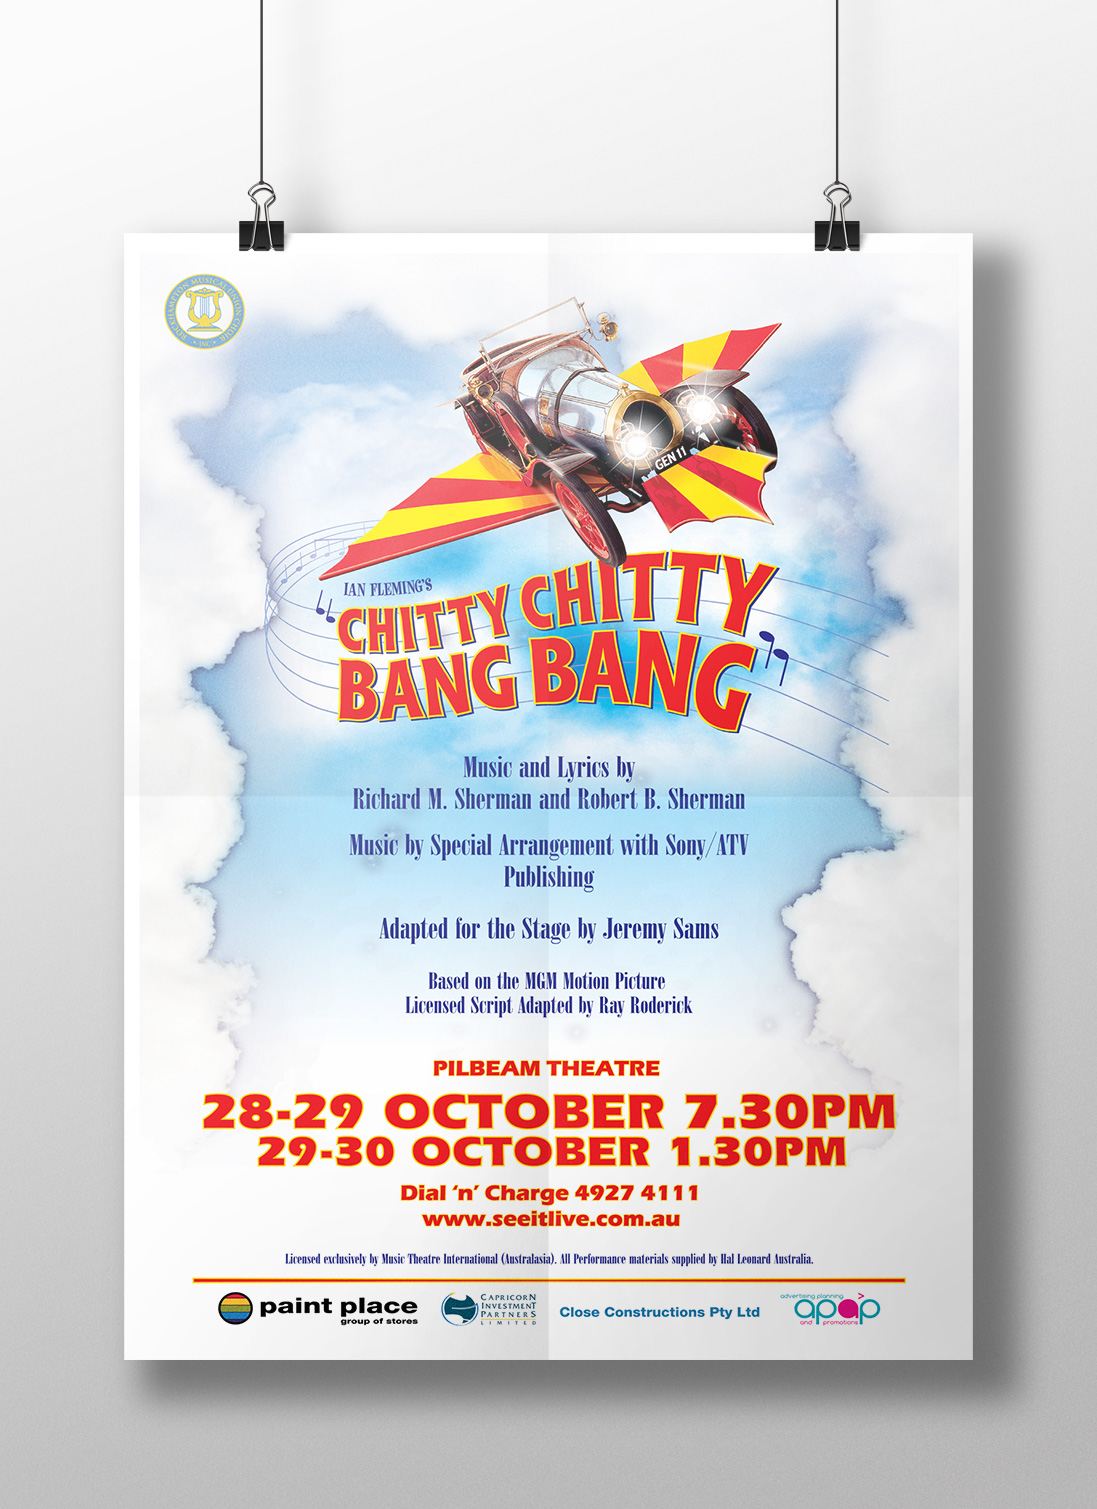 APAP Events Event Management and Graphic Design Rockhampton Chitty Chitty Bang Bang Poster Design